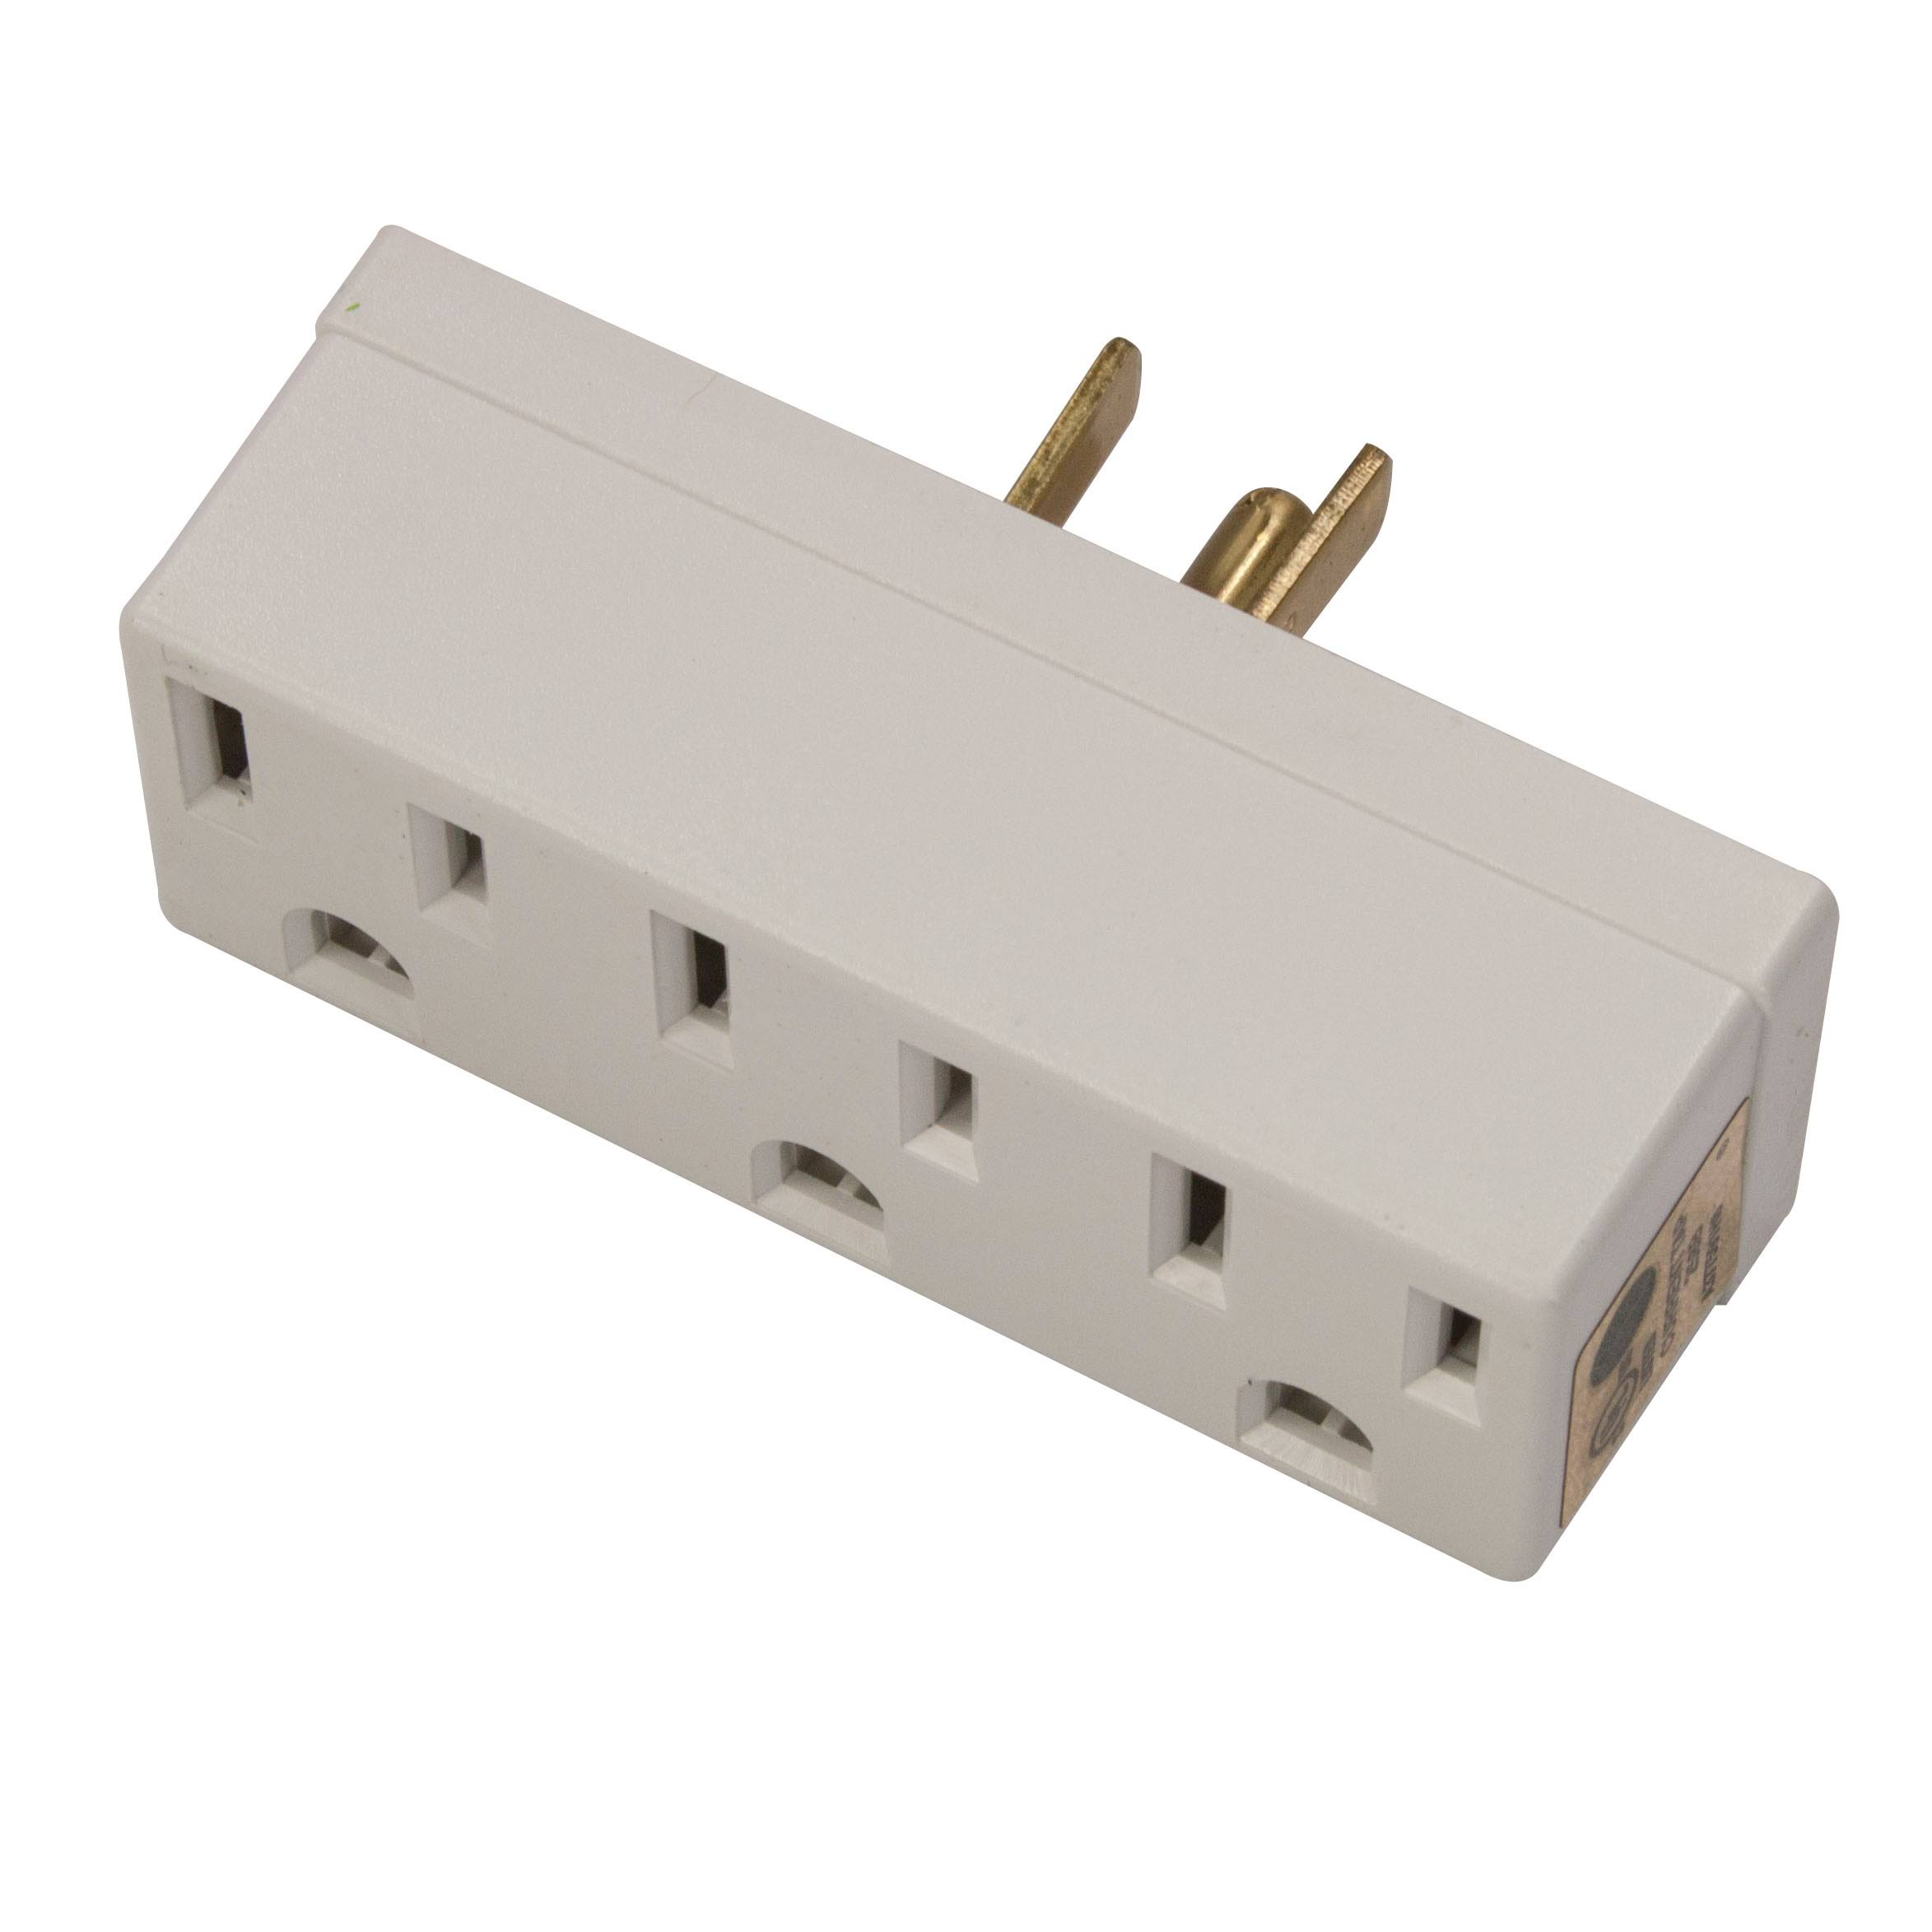 Leviton C22-00697-00w Outlet Adapter Grounded Triple Tap, White